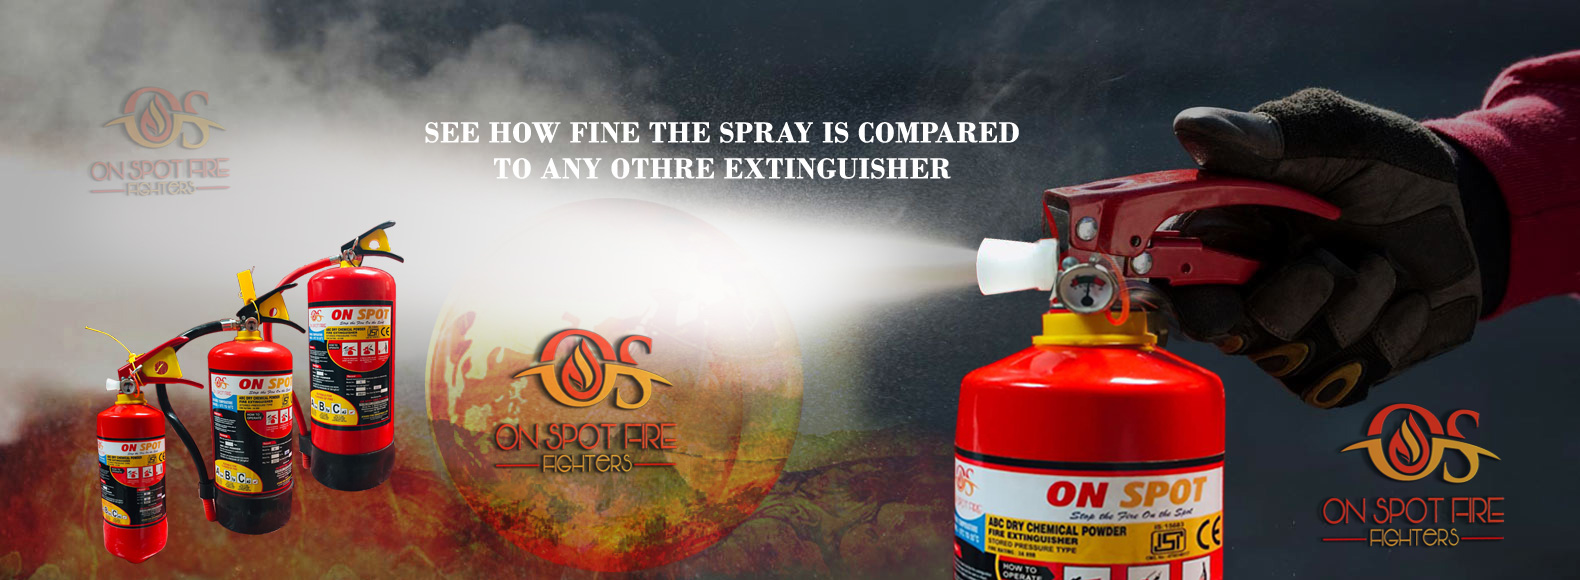 Fire Extinguishers Systems Manufactures Gujarat- India